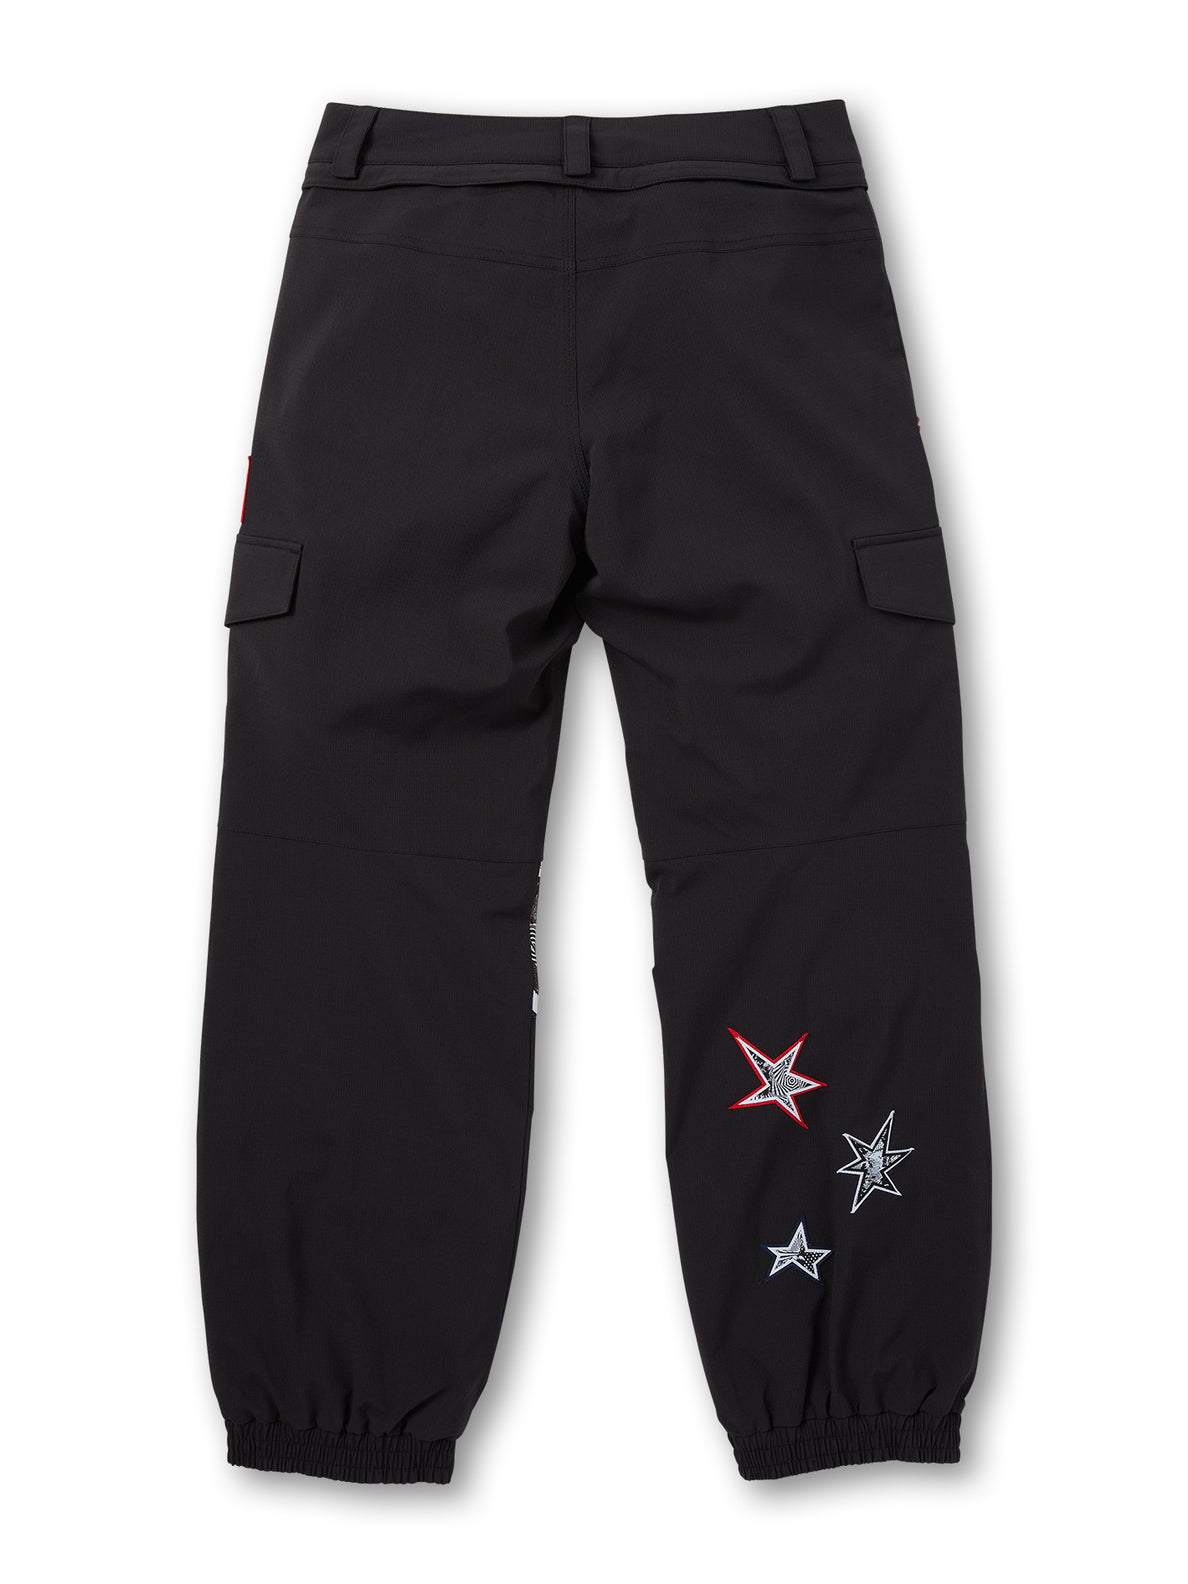 help! looking for LV sweatpants on dhgate : r/DHgate